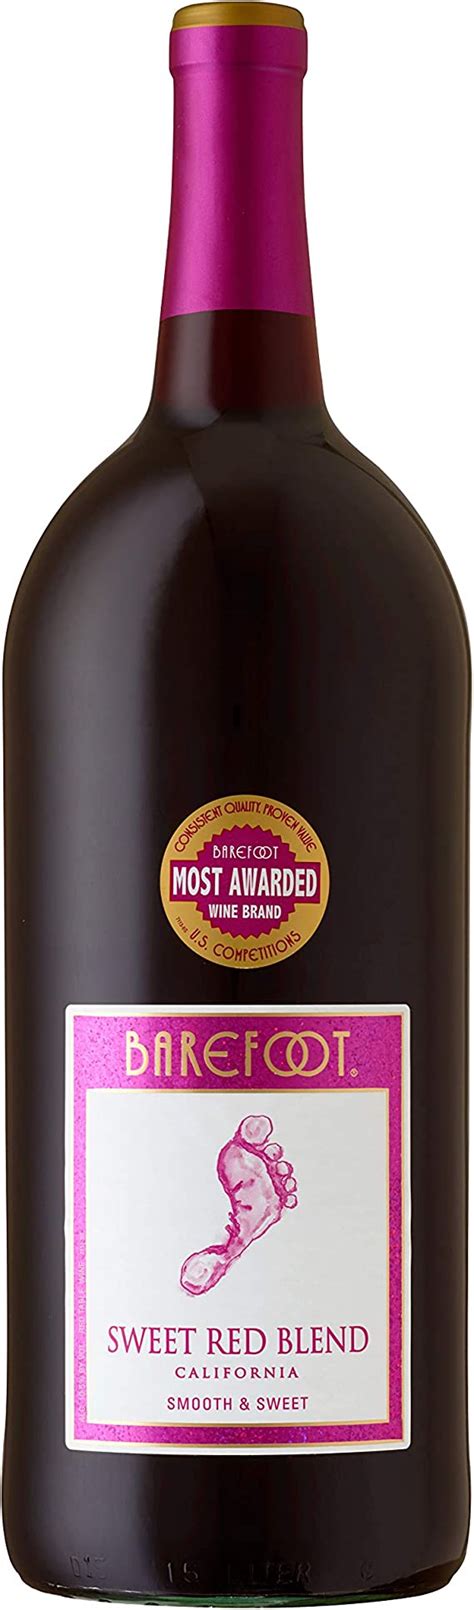 Barefoot Sweet Red Blend L At Amazon S Wine Store